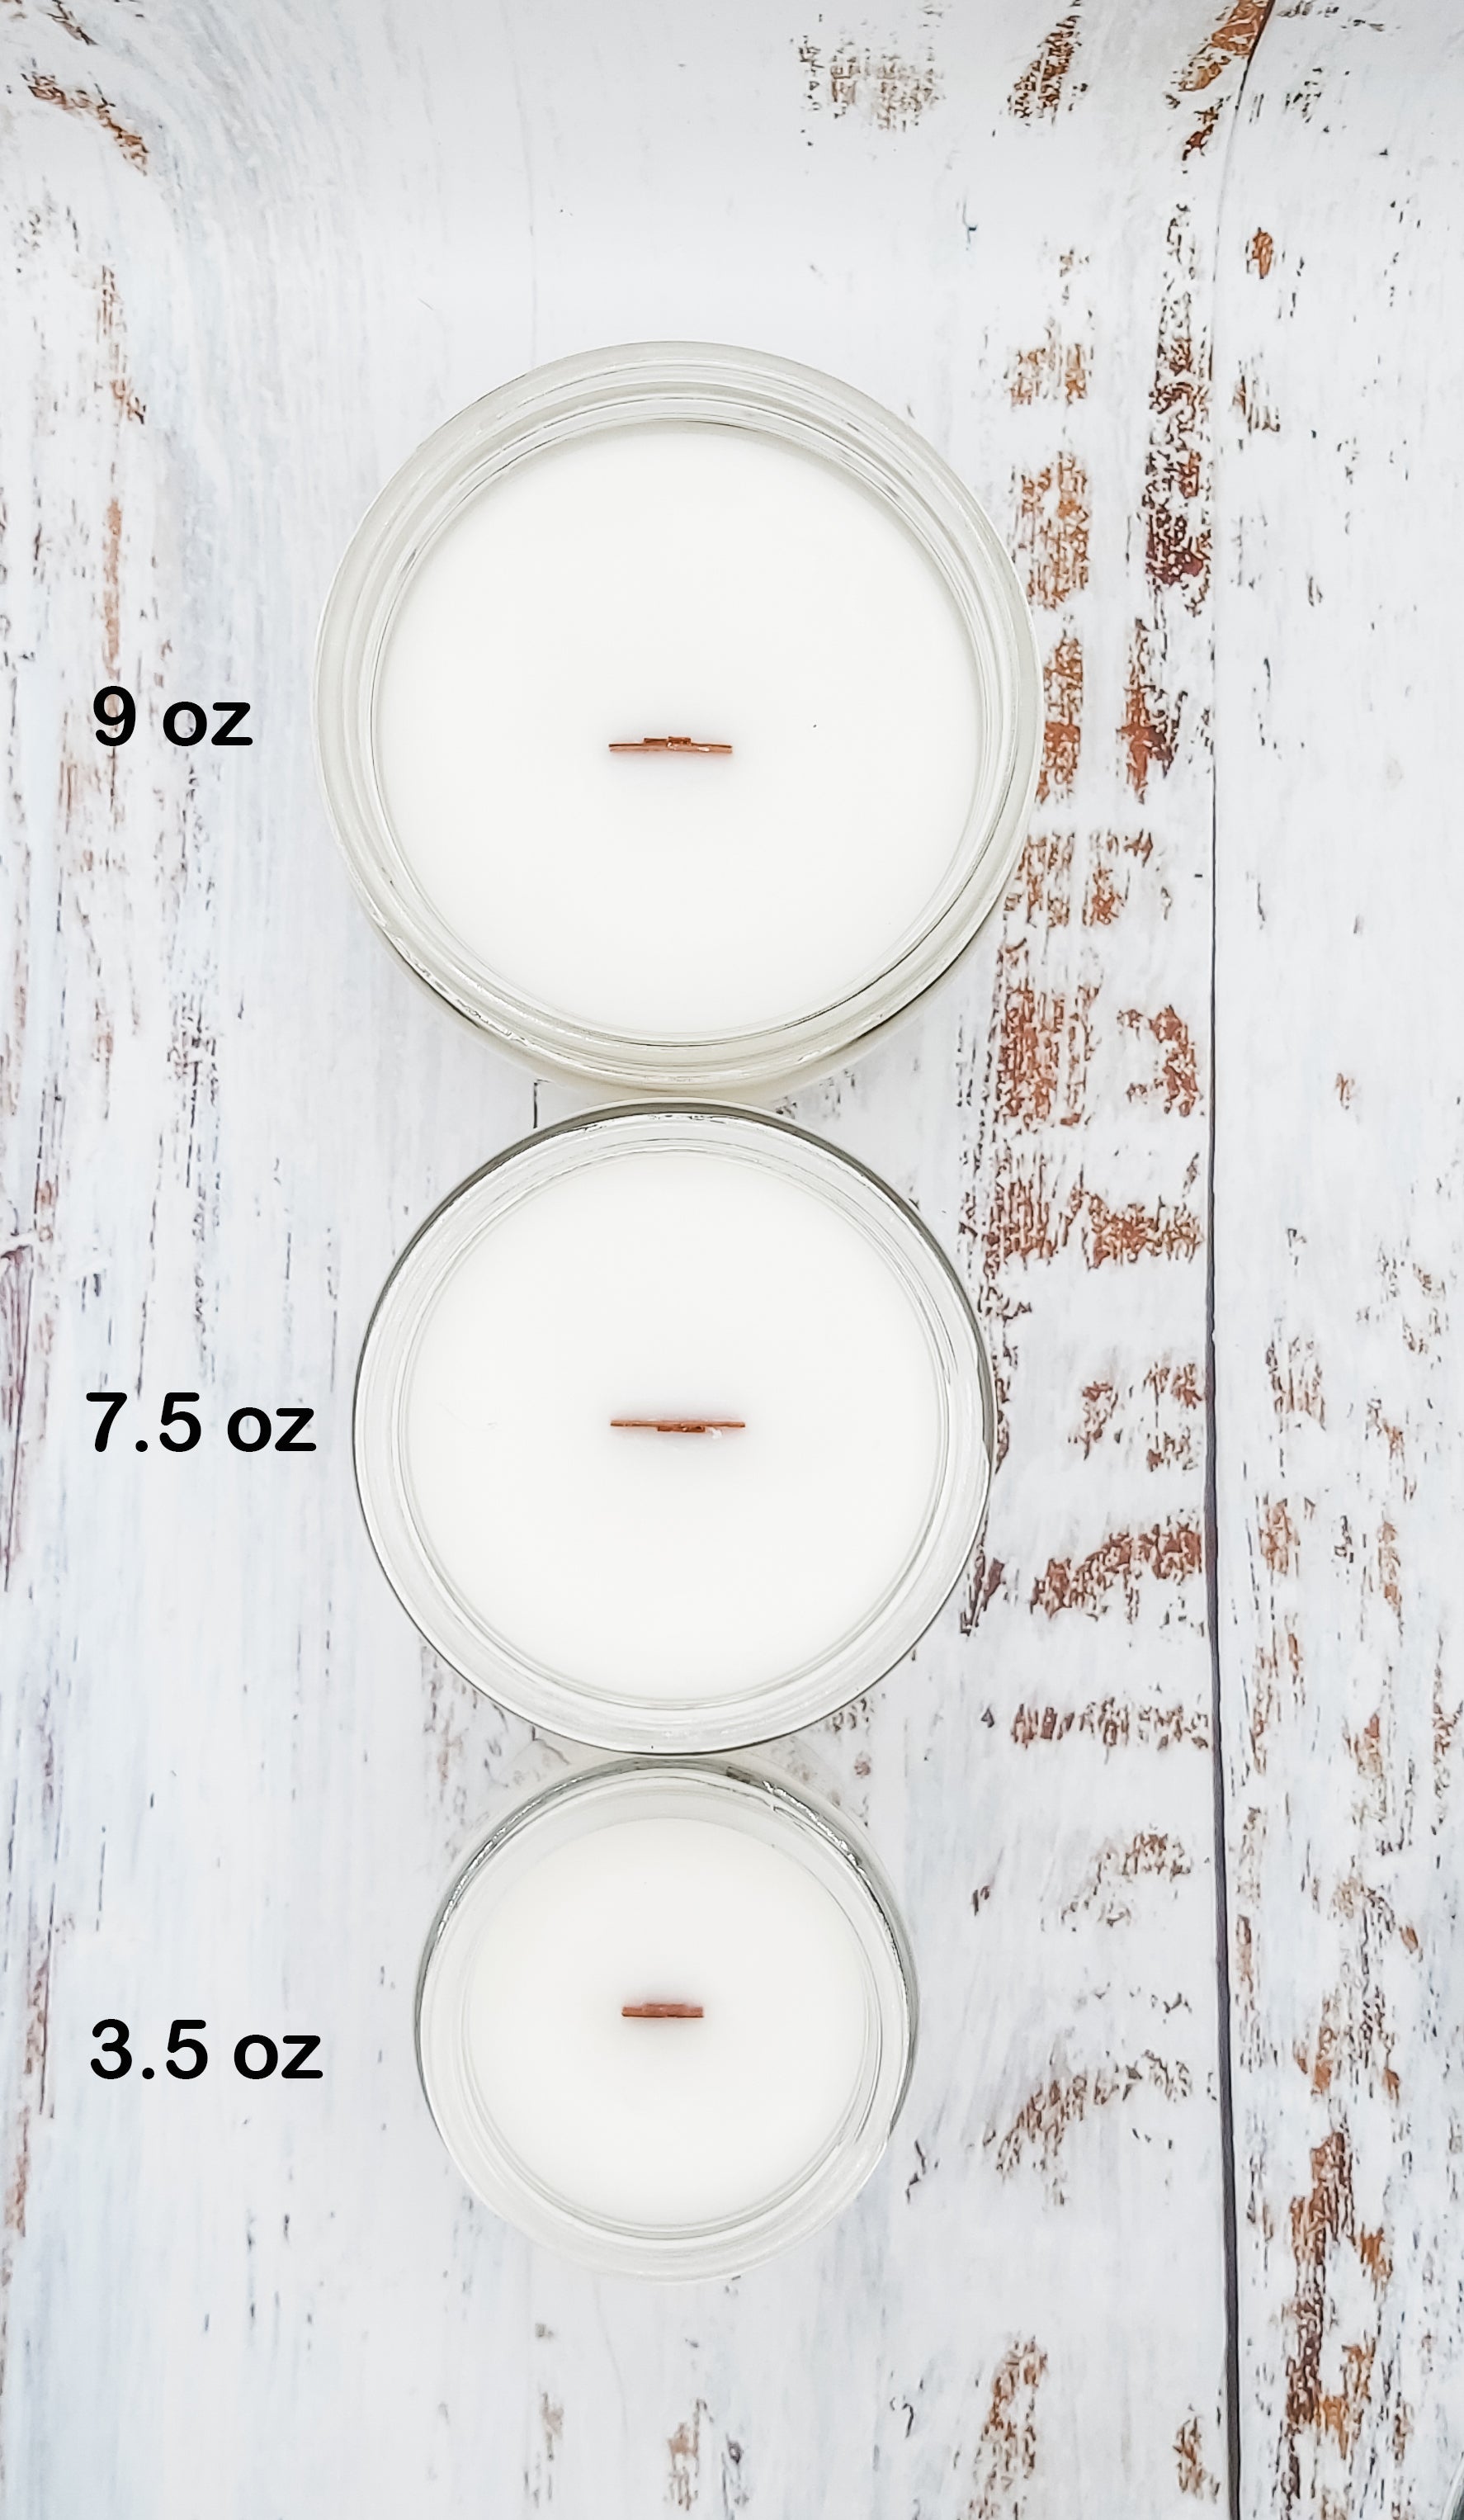 Flannel Throw - Scented Soy Candle